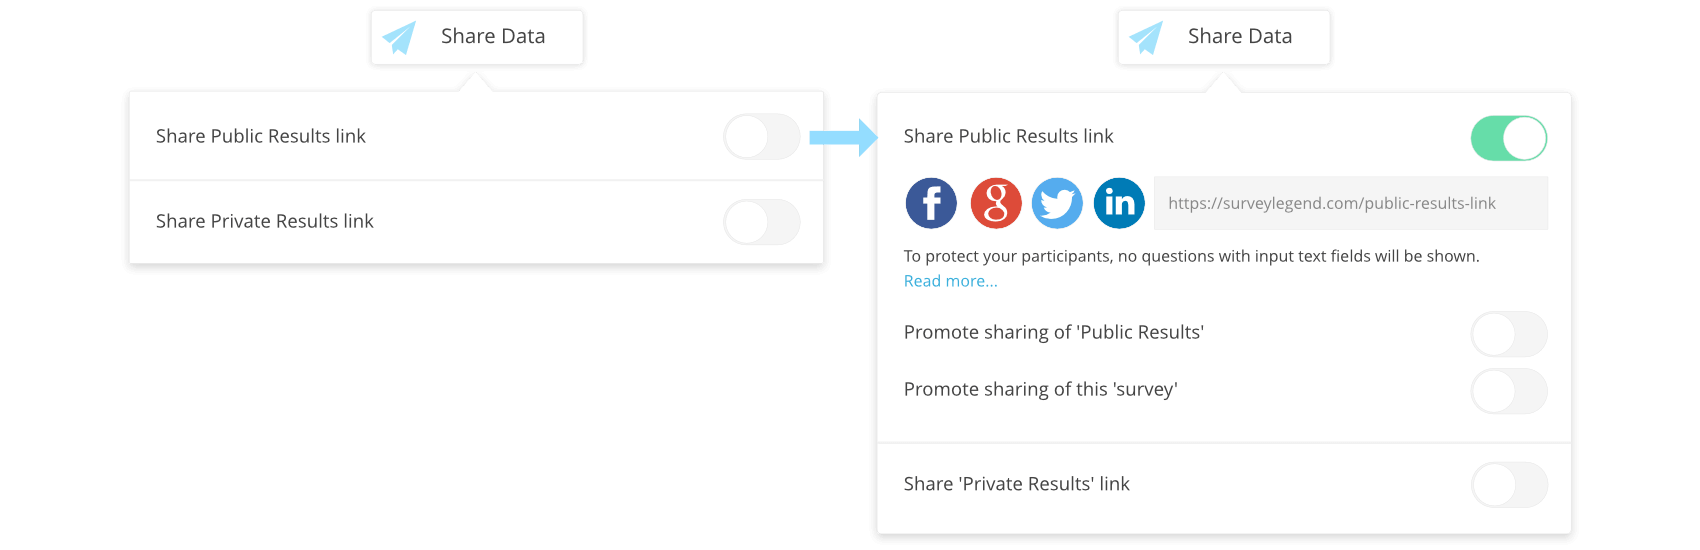 Clicking on the Share Data button gives you options of sharing your surveys privately or publicly.